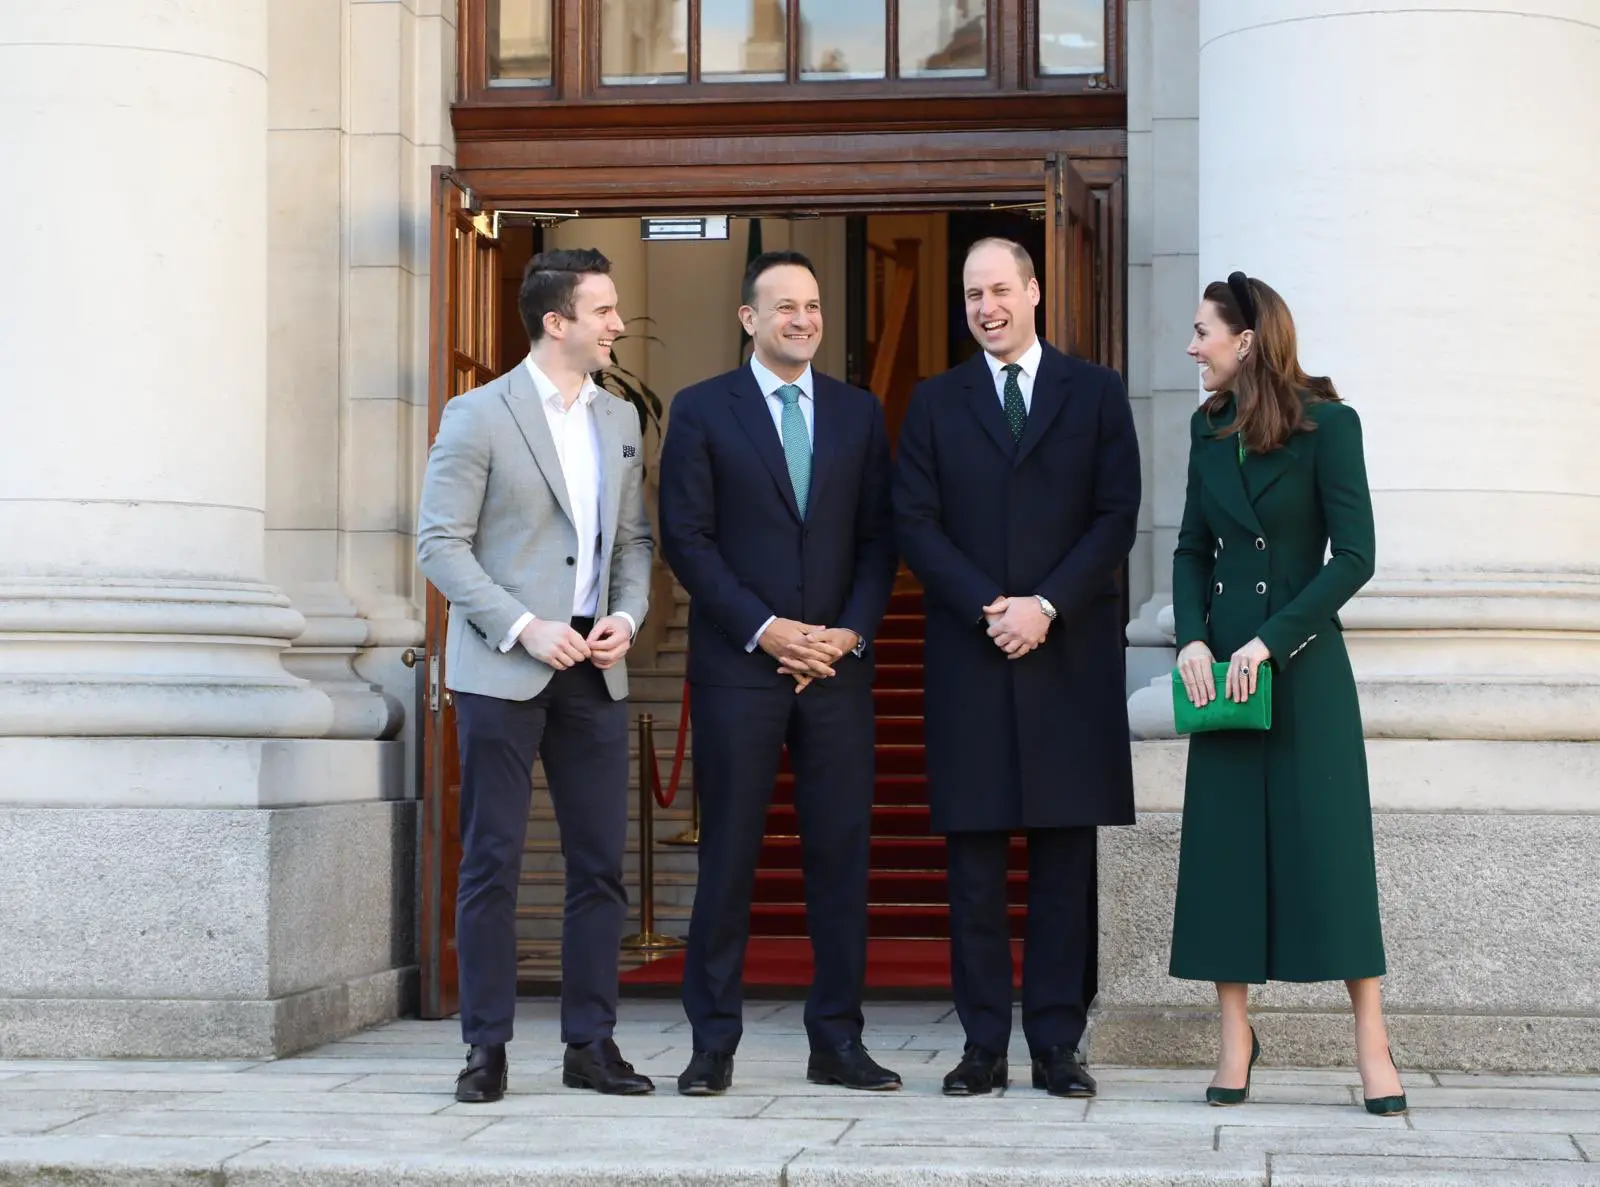 The Duke and Duchess of Cambridge met with Irish Prime Minister and his partner during Royal Visit Ireland in 2020